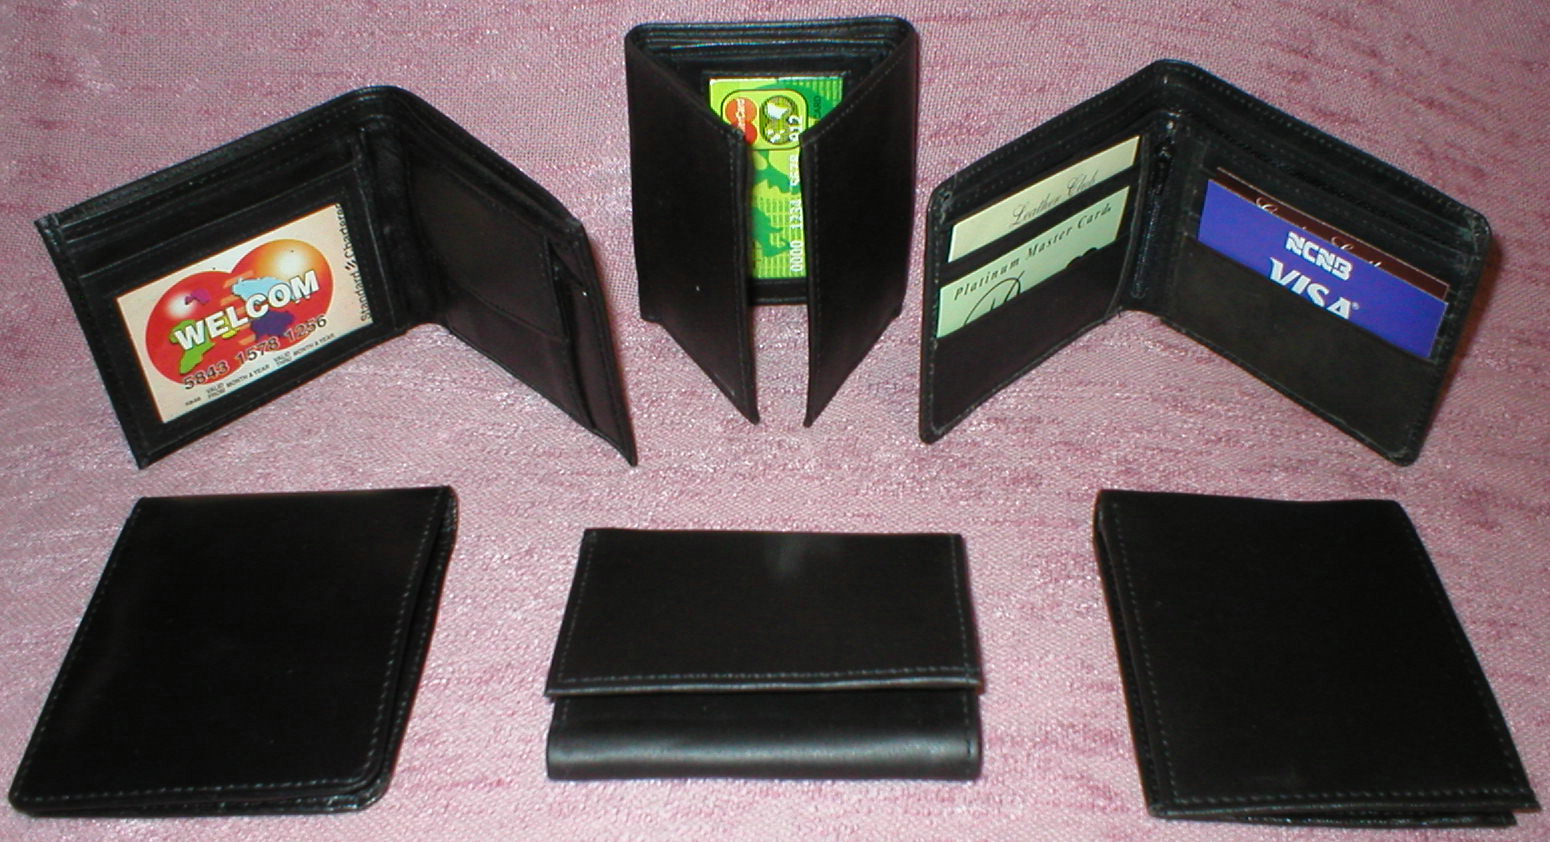 WALLETS, WHOLESALE LOT OF 10, GENUINE LEATHER MENS ASSORTED WALLETS,  BIFOLD/TRIFOLD HOLIDAY GIFTS - GiftsAndSales.com